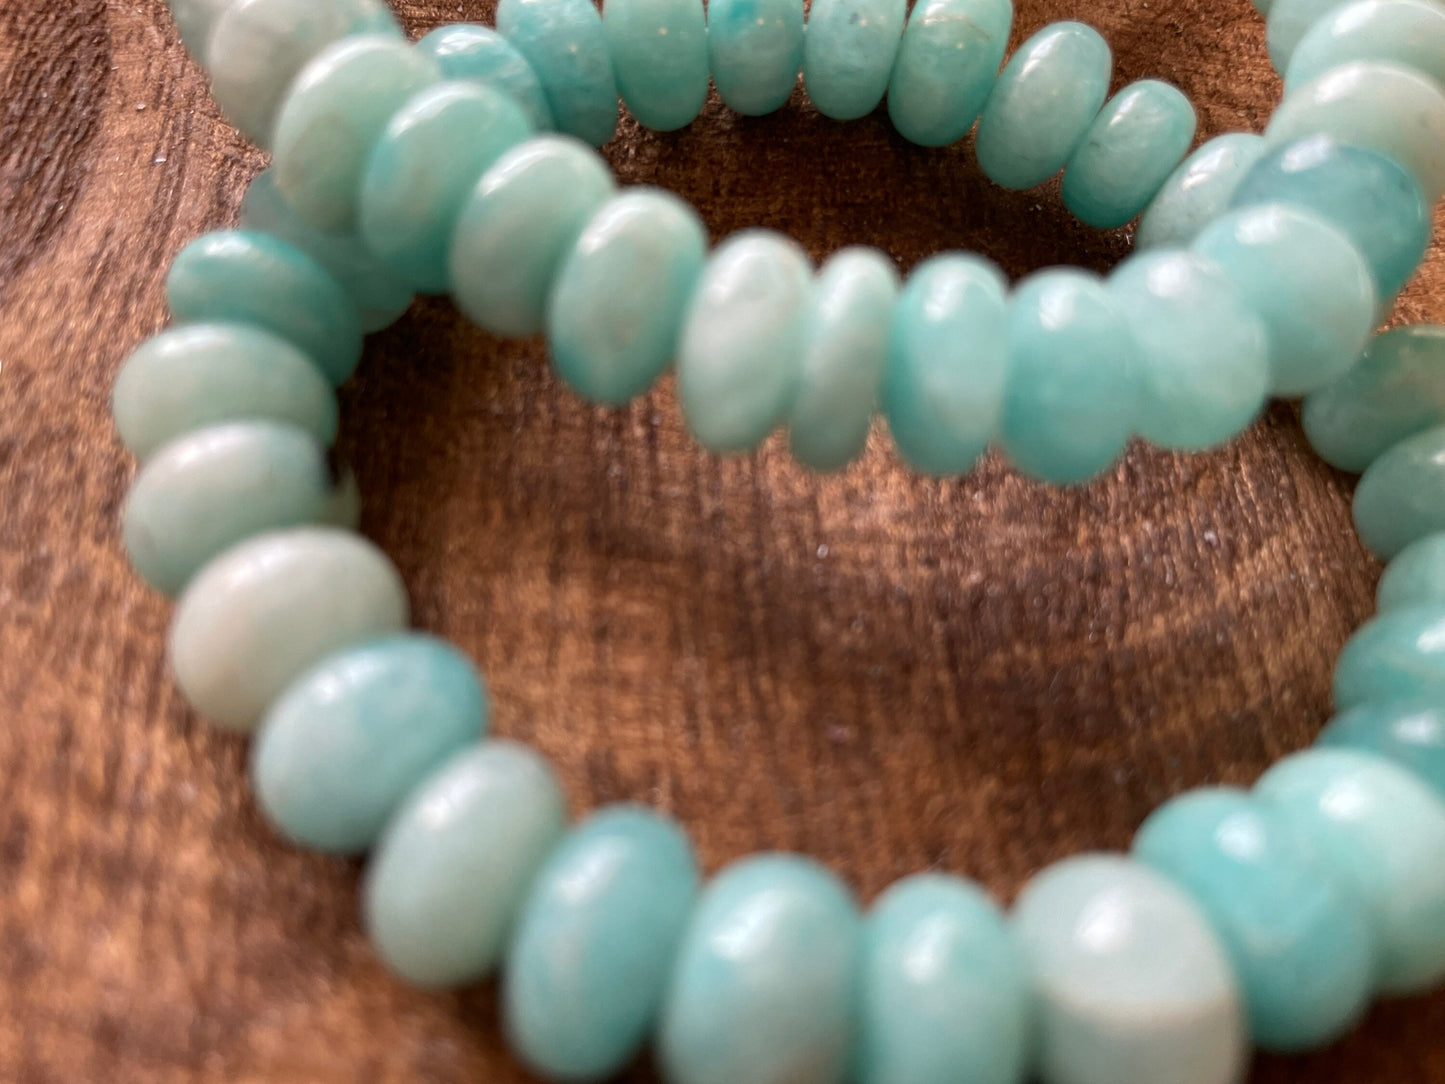 Unique and beautiful Amazonite bracelet one size fits all